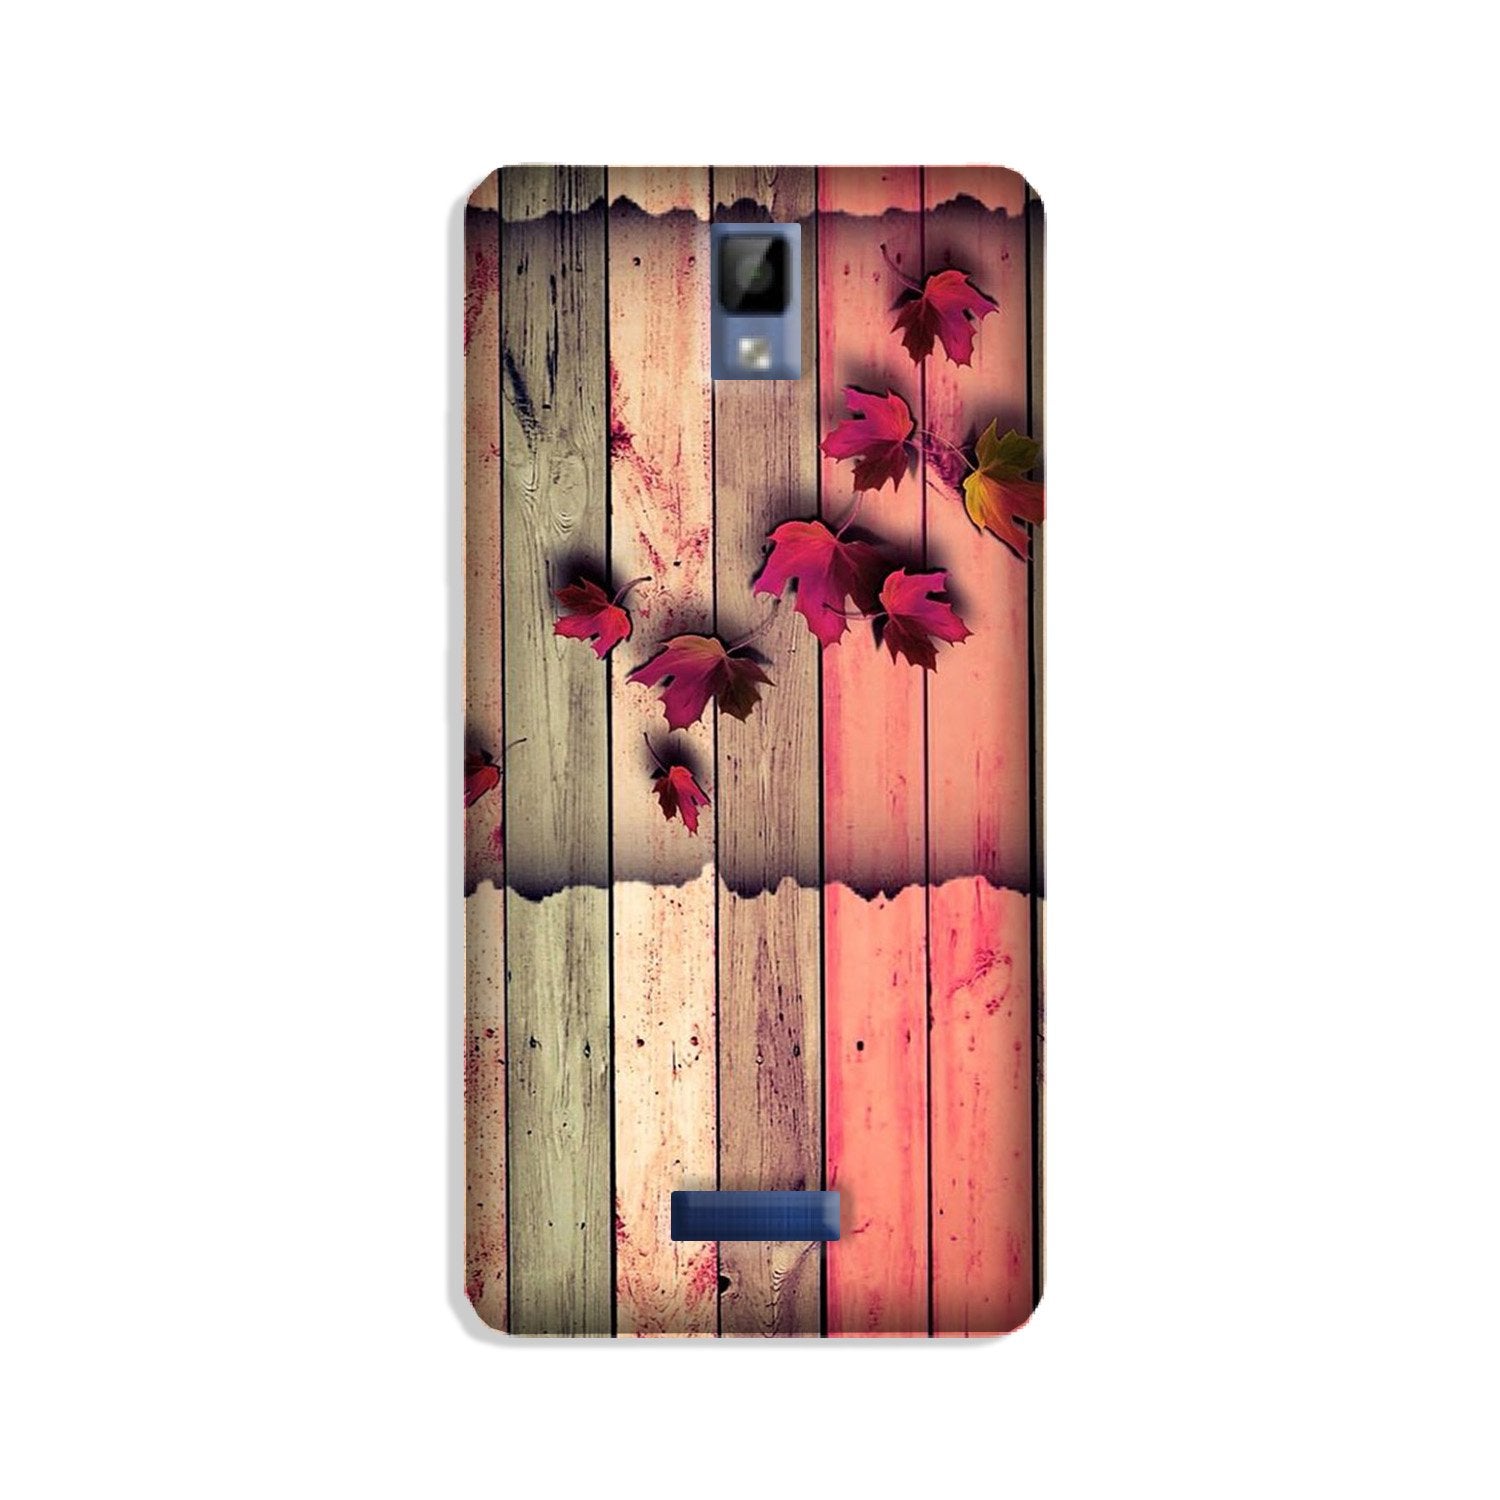 Wooden look2 Case for Gionee P7